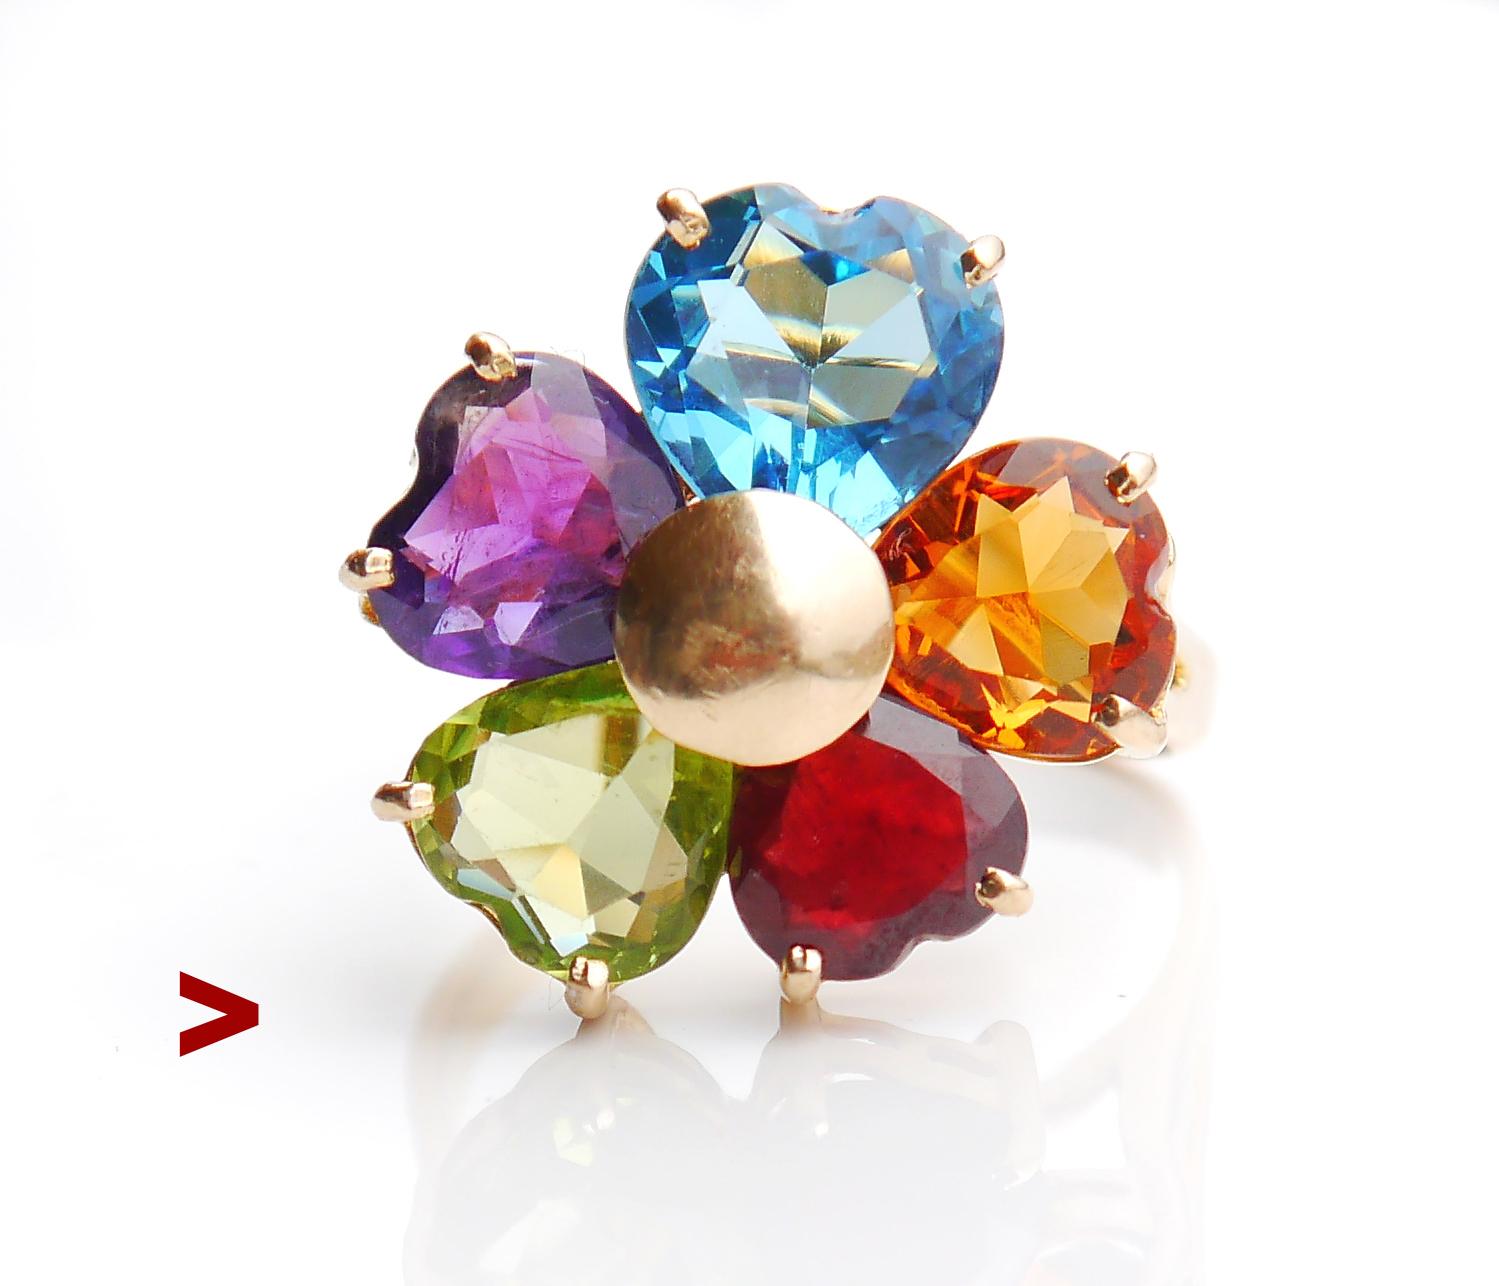 Flower ring in solid 14K Yellow Gold, petals cut of natural colorful gemstones, all heart cut.

Largest blue Topaz is 10 mm wide / ca 3.5 ct;cognac colored Citrine is 8.5m wide /1.8ct ; Garnet 7.5mm /1.59ct;

Green Peridot is 8mm /ca. 1.7ct ; purple